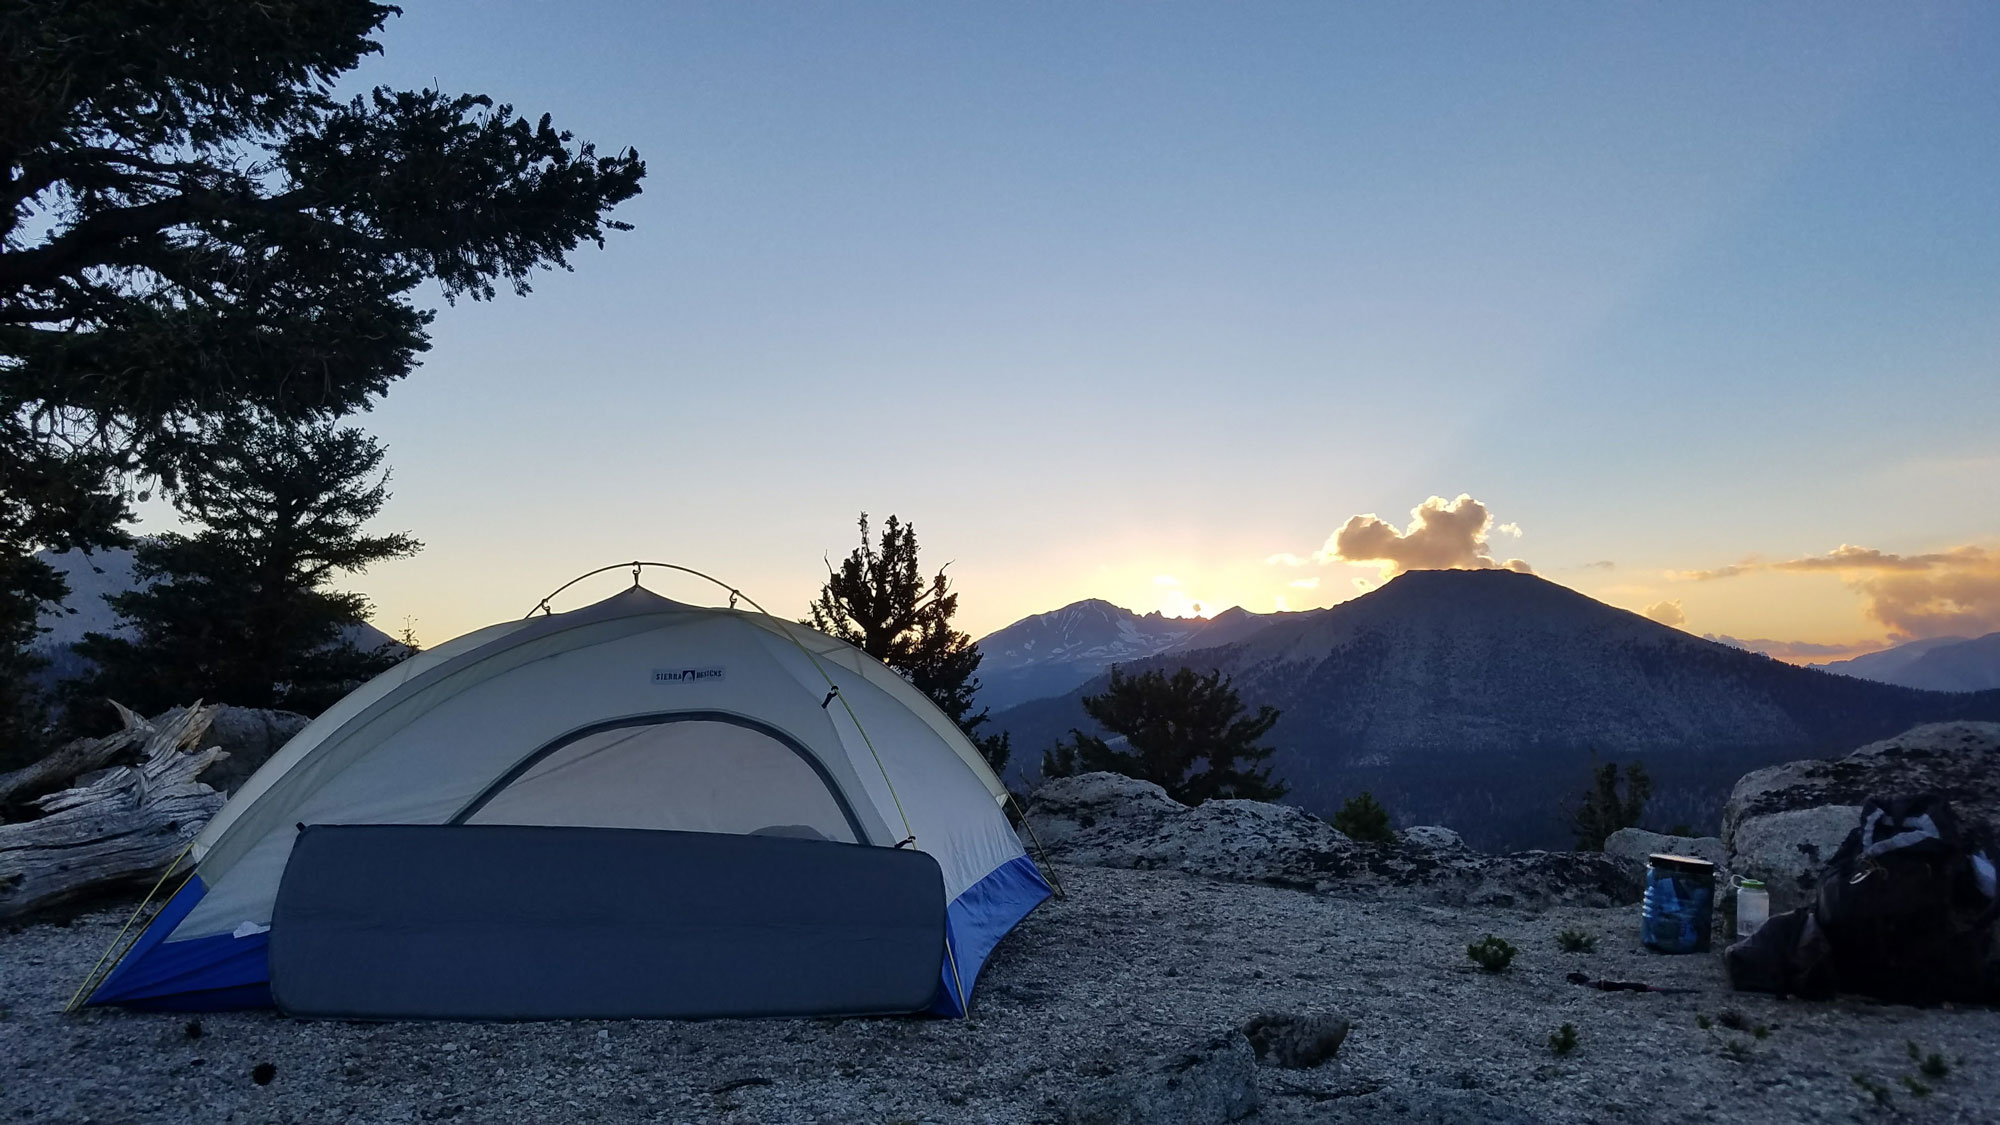 Campsite for first night